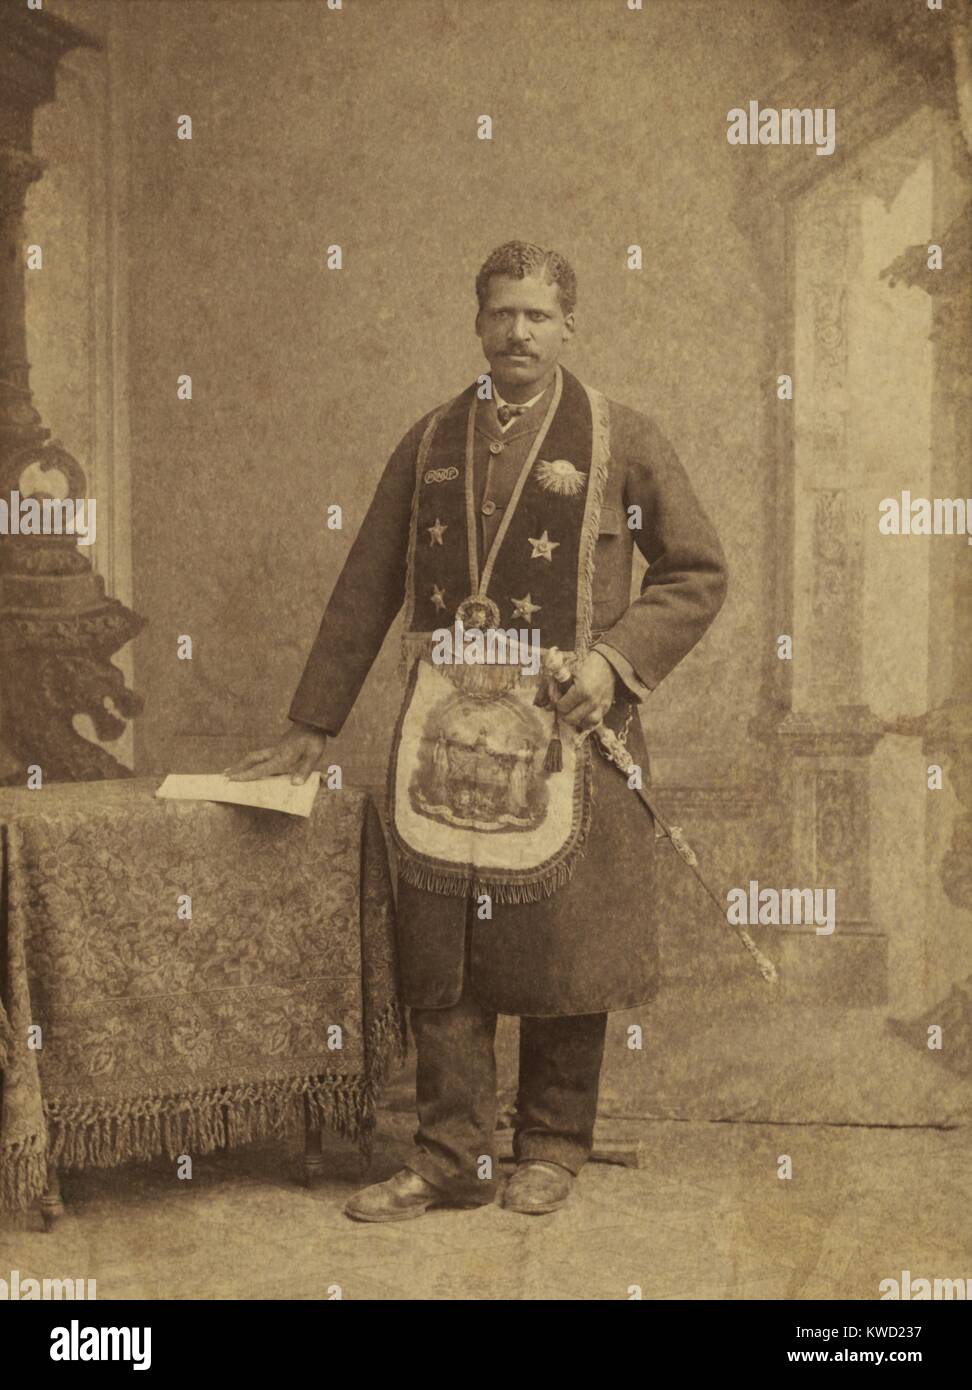 African American member of the Grand United Order of Odd Fellows, c. 1890-1900. He wears fraternal order collar and apron. His collar is embroidered with a three links symbol on the left and the sun on the right  (BSLOC 2017 20 114) Stock Photo